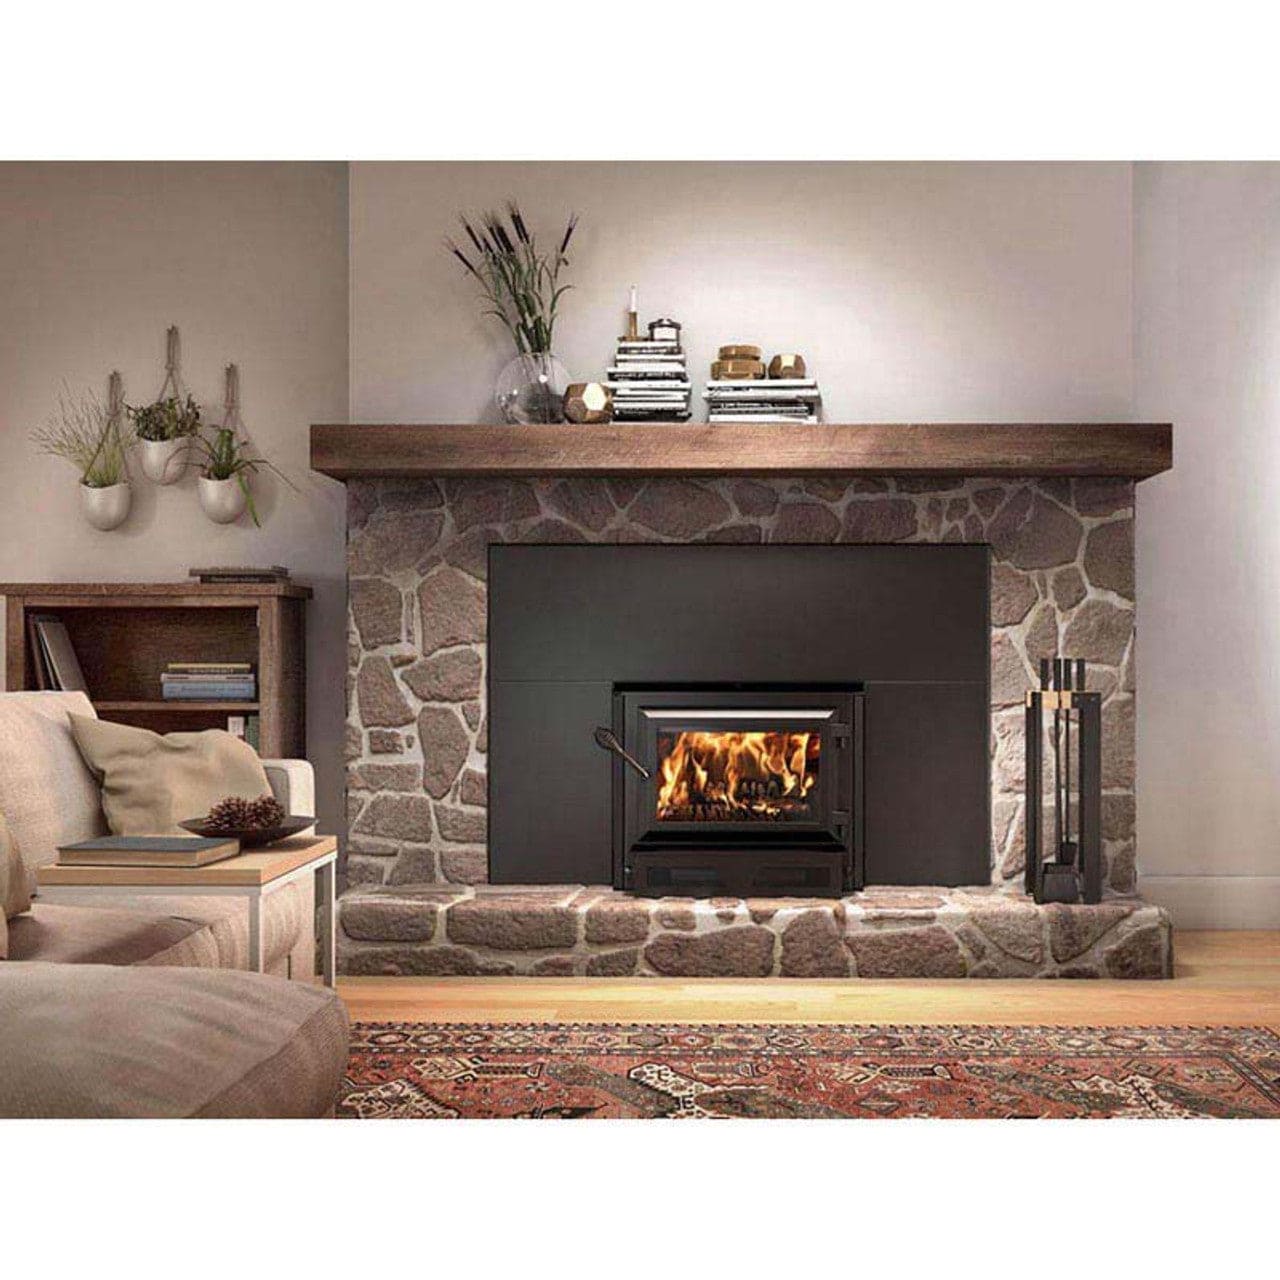 Ventis HEI170 Wood Burning Fireplace Insert with 1800 Sq Ft Max Heating Space - HEI170 - Chimney Cricket